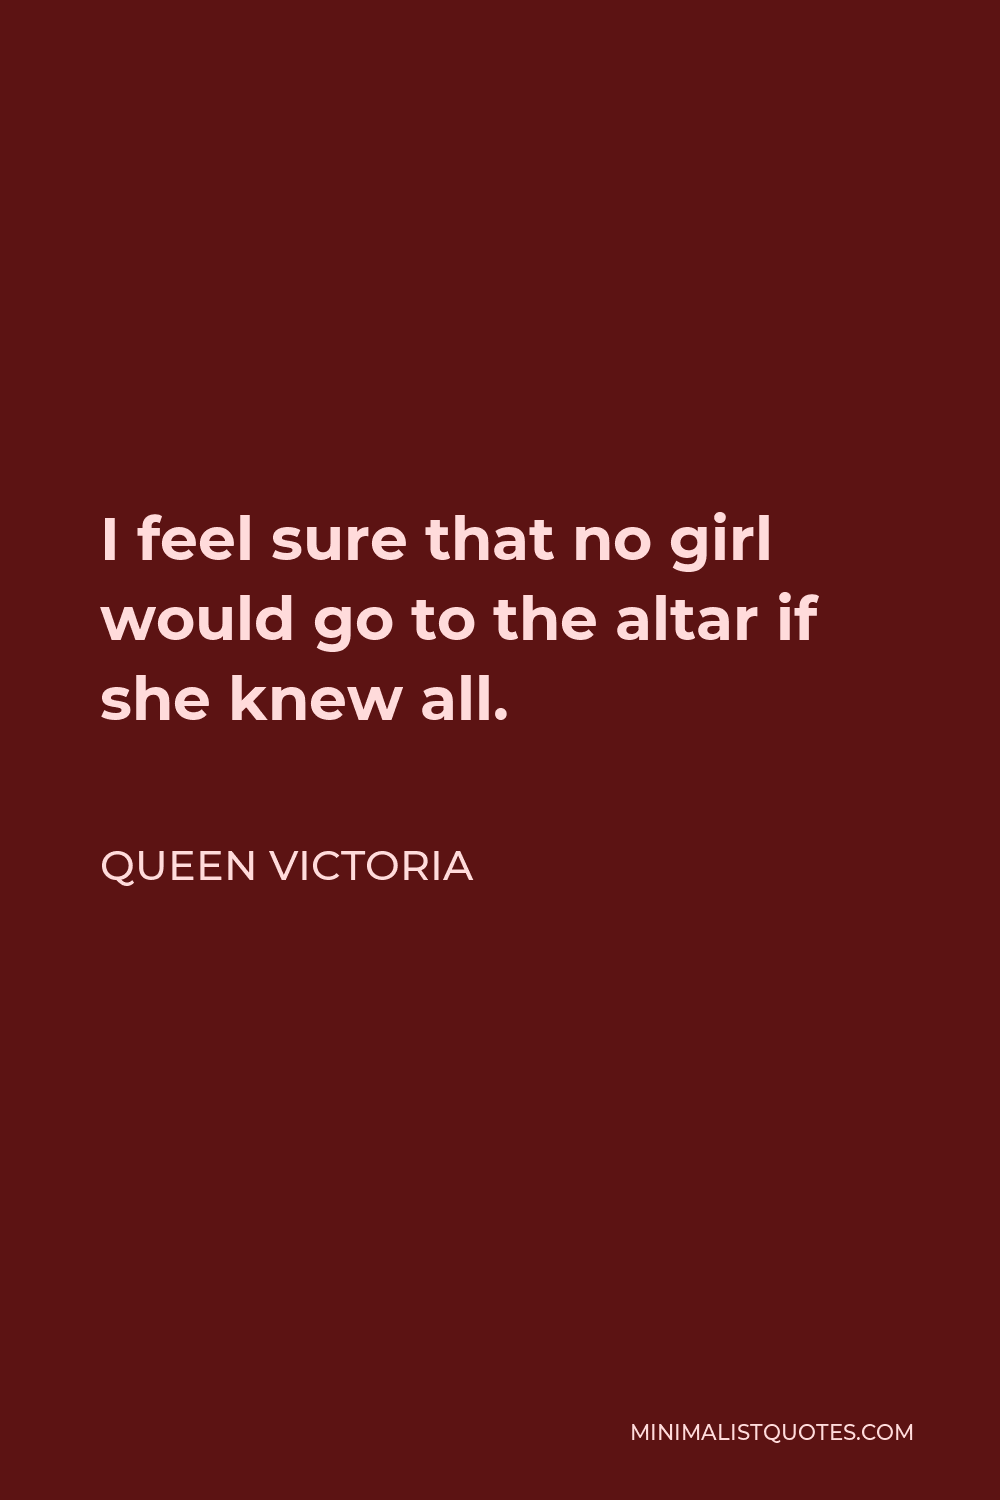 Queen Victoria Quote - I feel sure that no girl would go to the altar if she knew all.